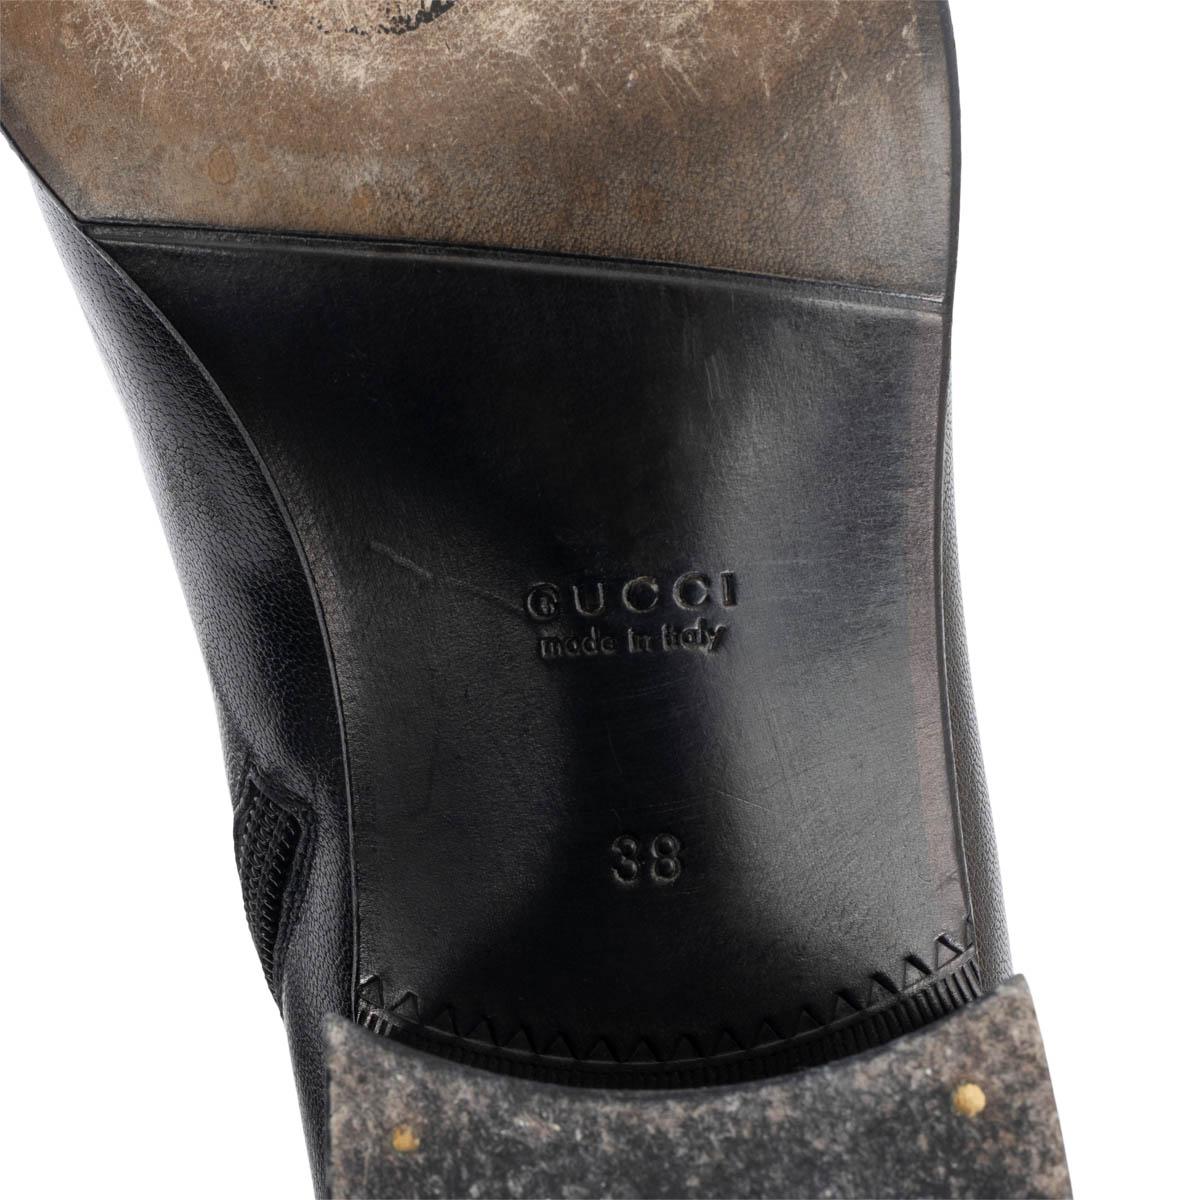 GUCCI black leather KITTEN BLOCK HEEL CHAIN Ankle Boots Shoes 39 For Sale 4